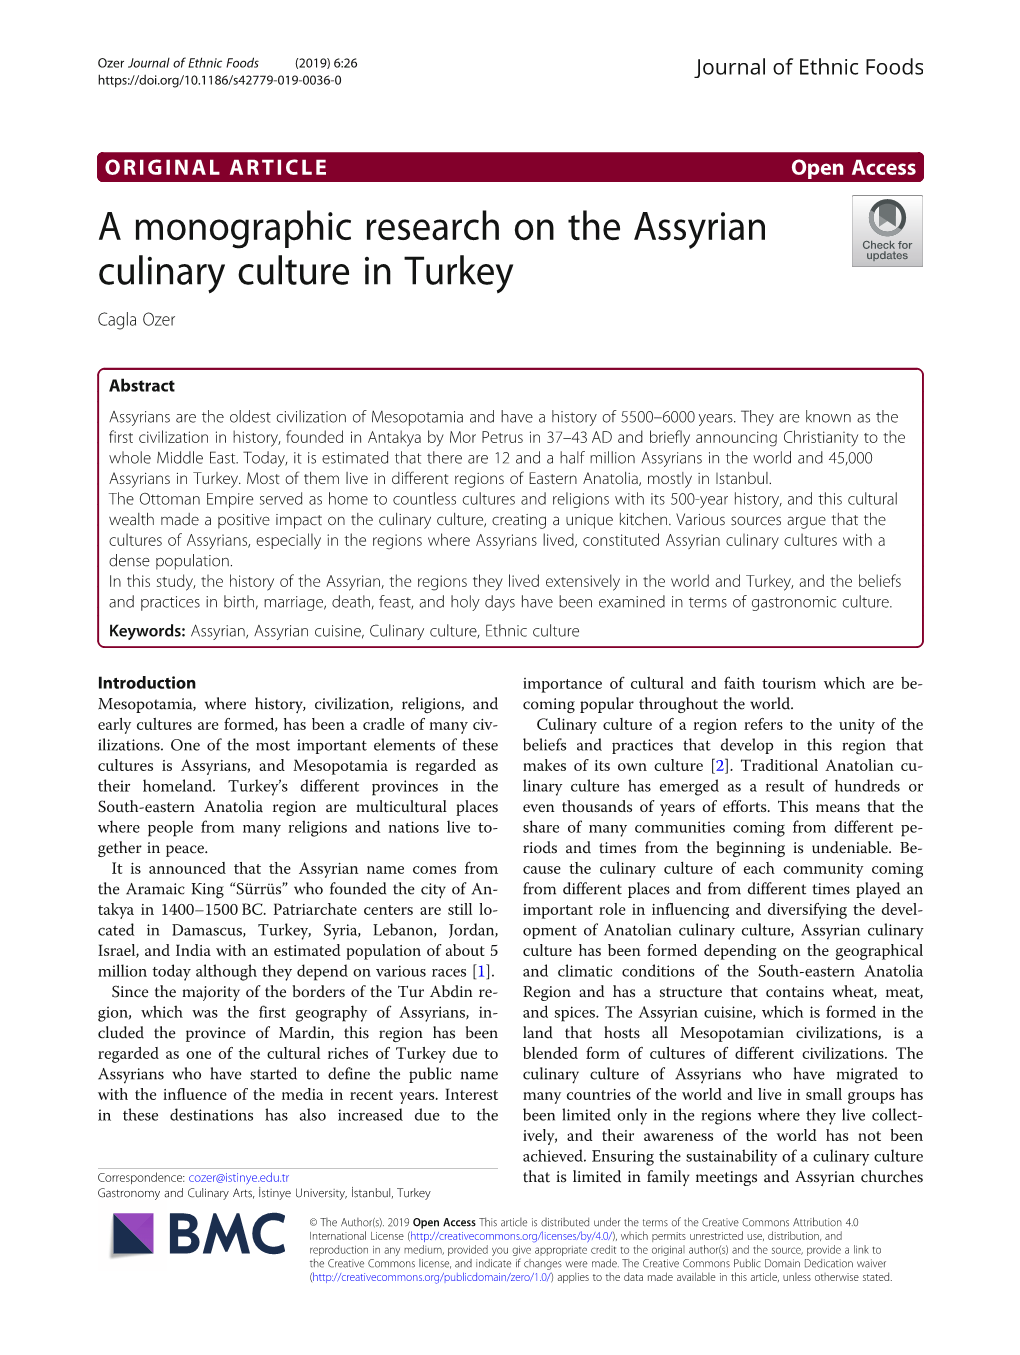 A Monographic Research on the Assyrian Culinary Culture in Turkey Cagla Ozer